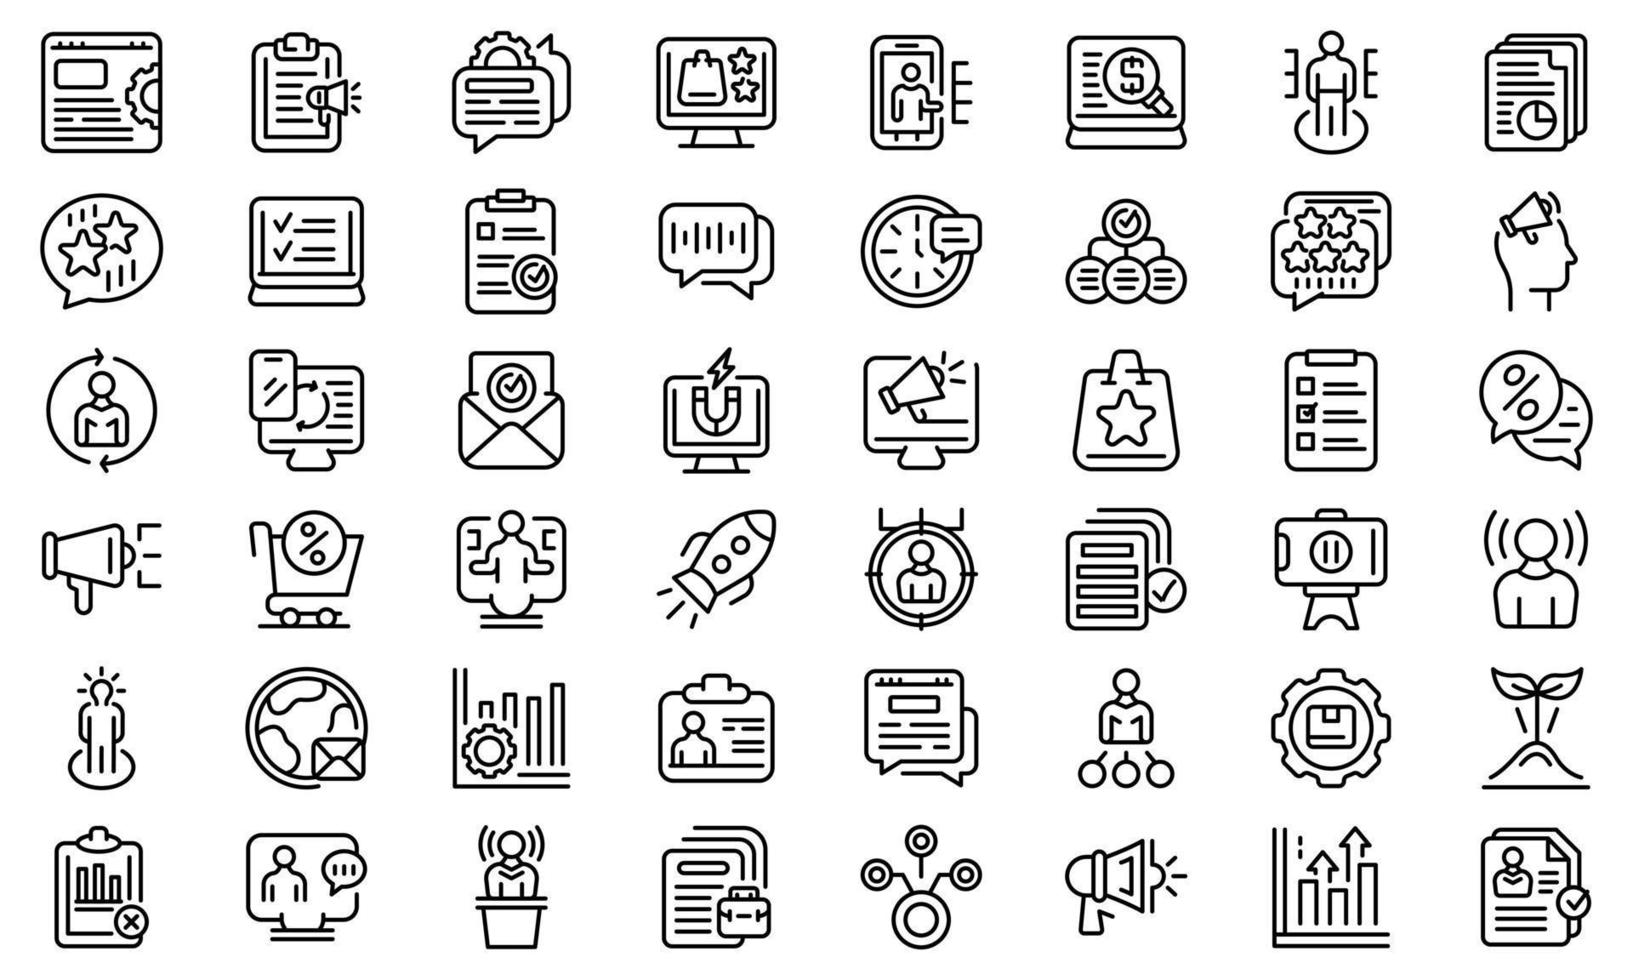 Brand ambassador icon, outline style vector